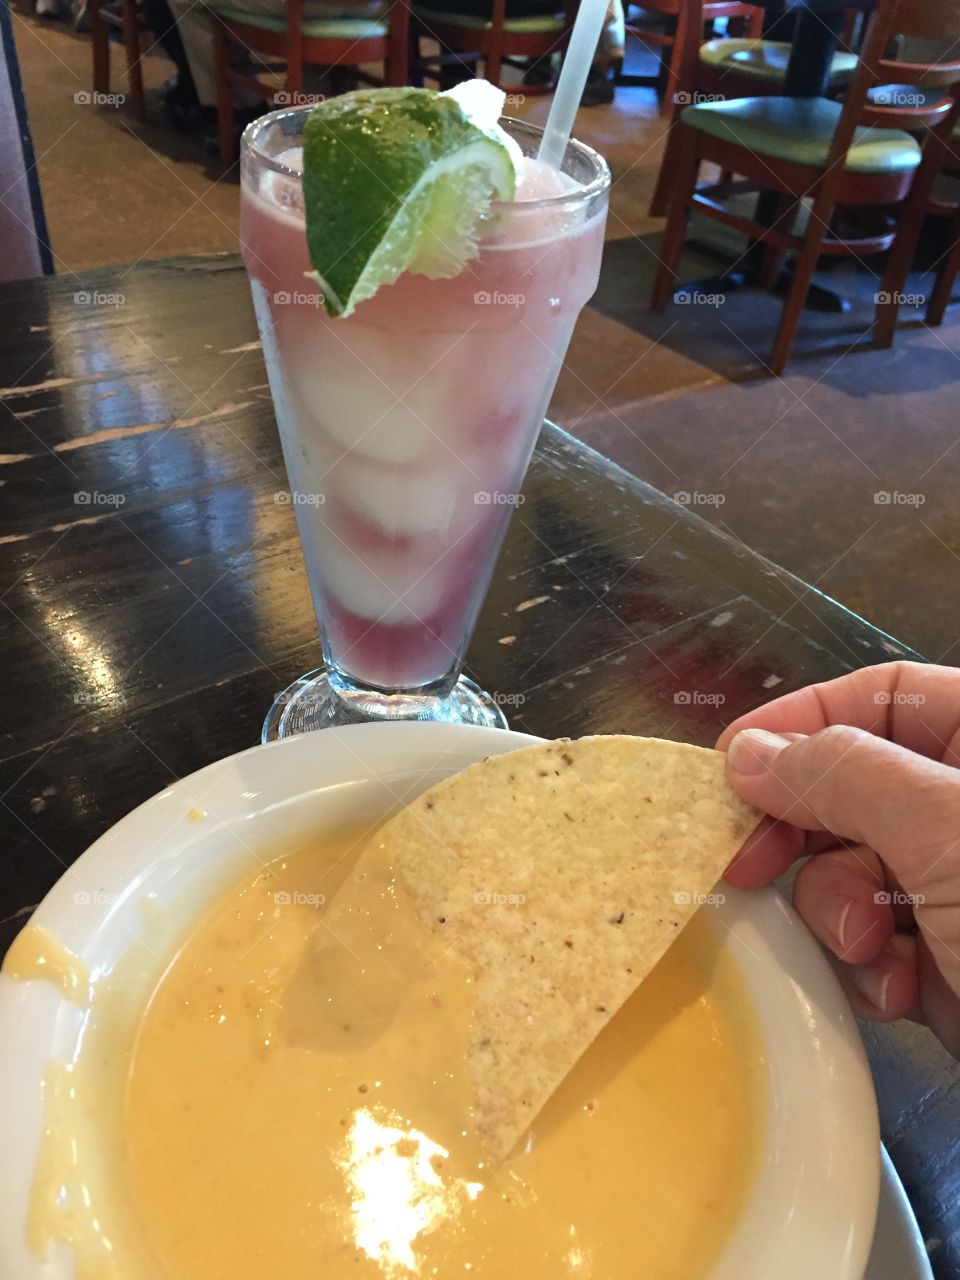 Queso, chip and margarita